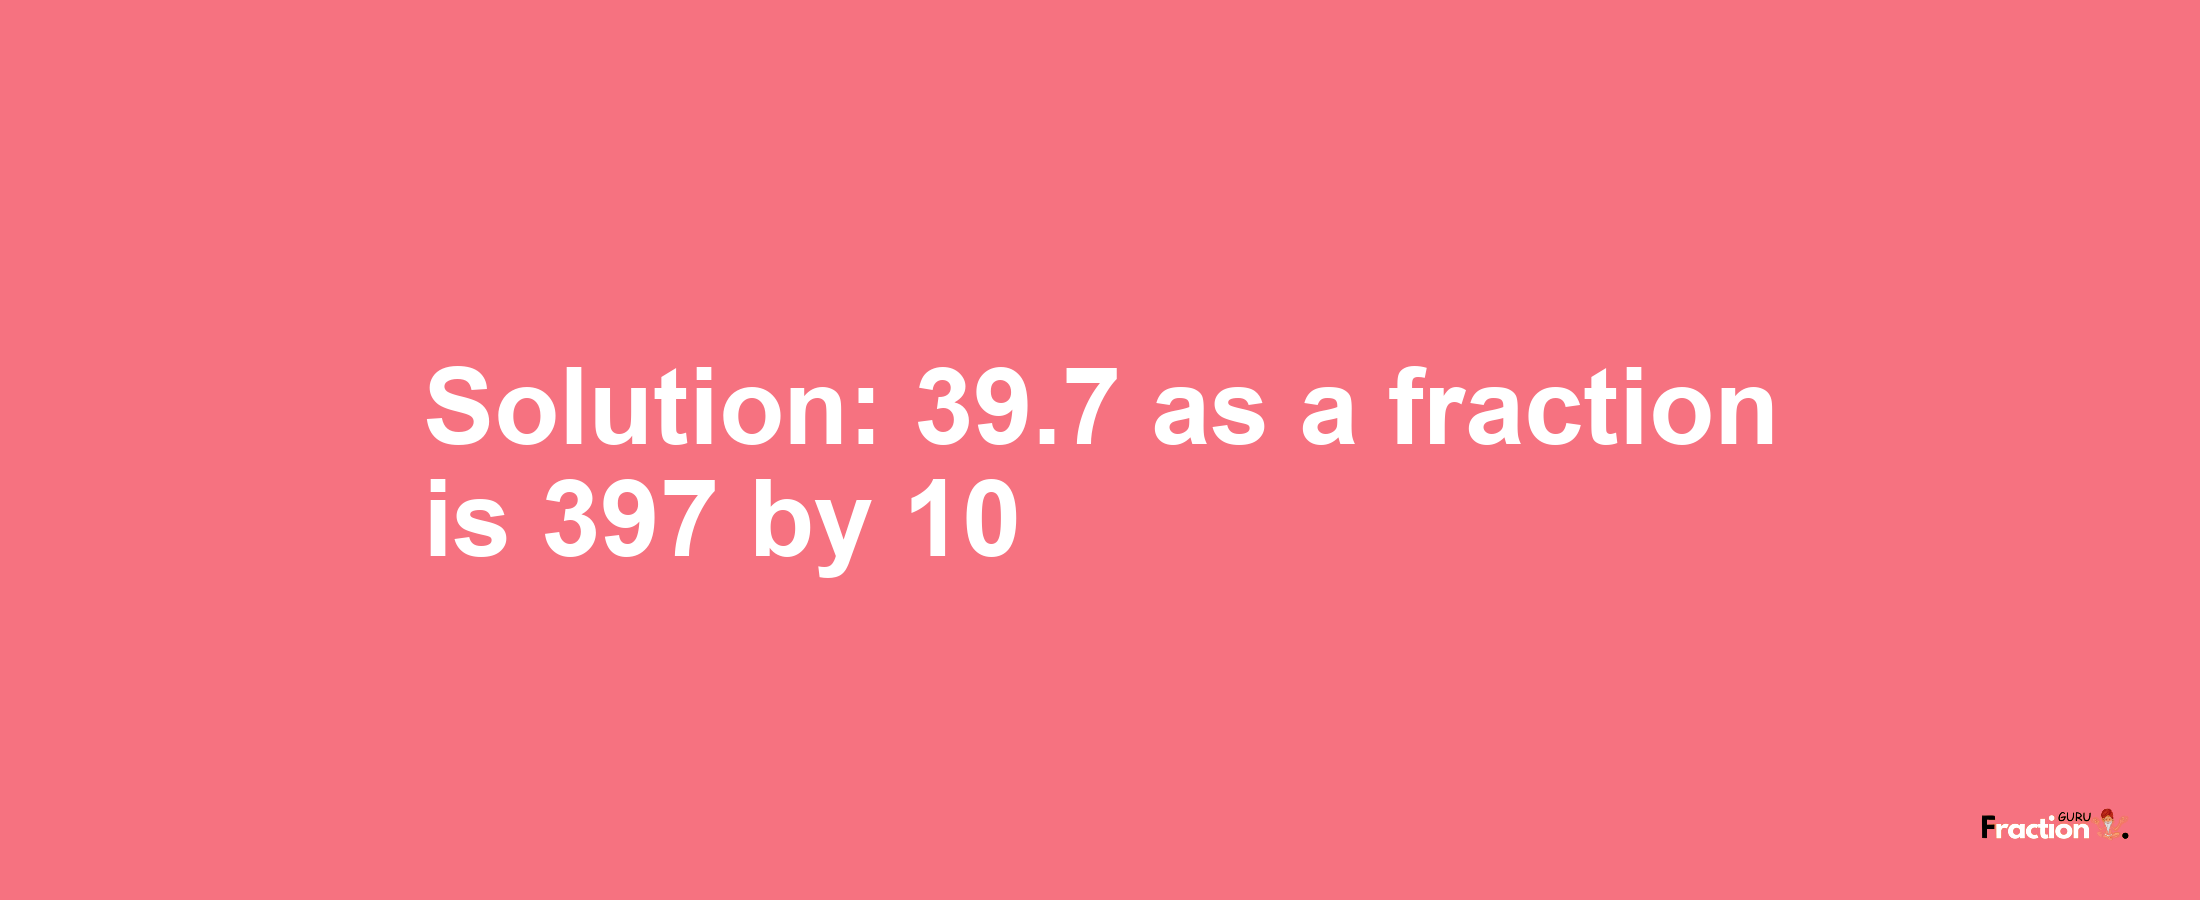 Solution:39.7 as a fraction is 397/10